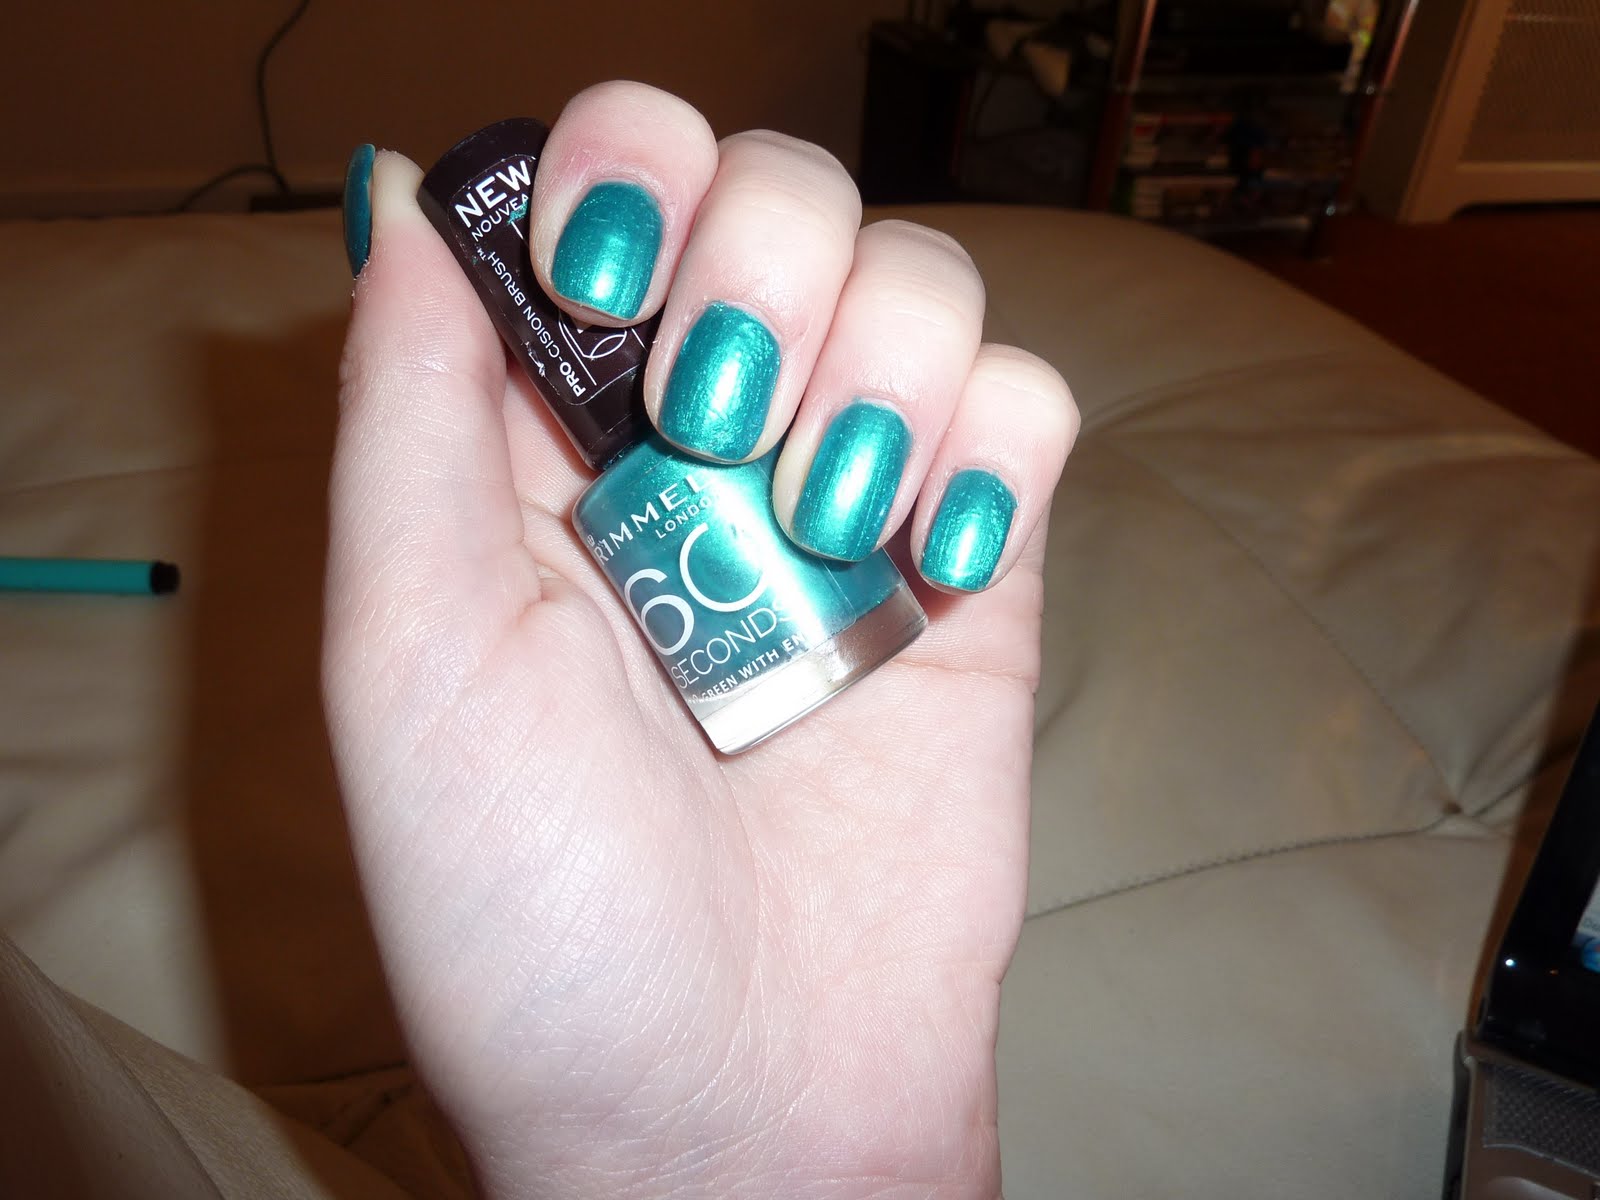 Nail Of The Day! and I'm wearing the Rimmel London 60seconds nail polish